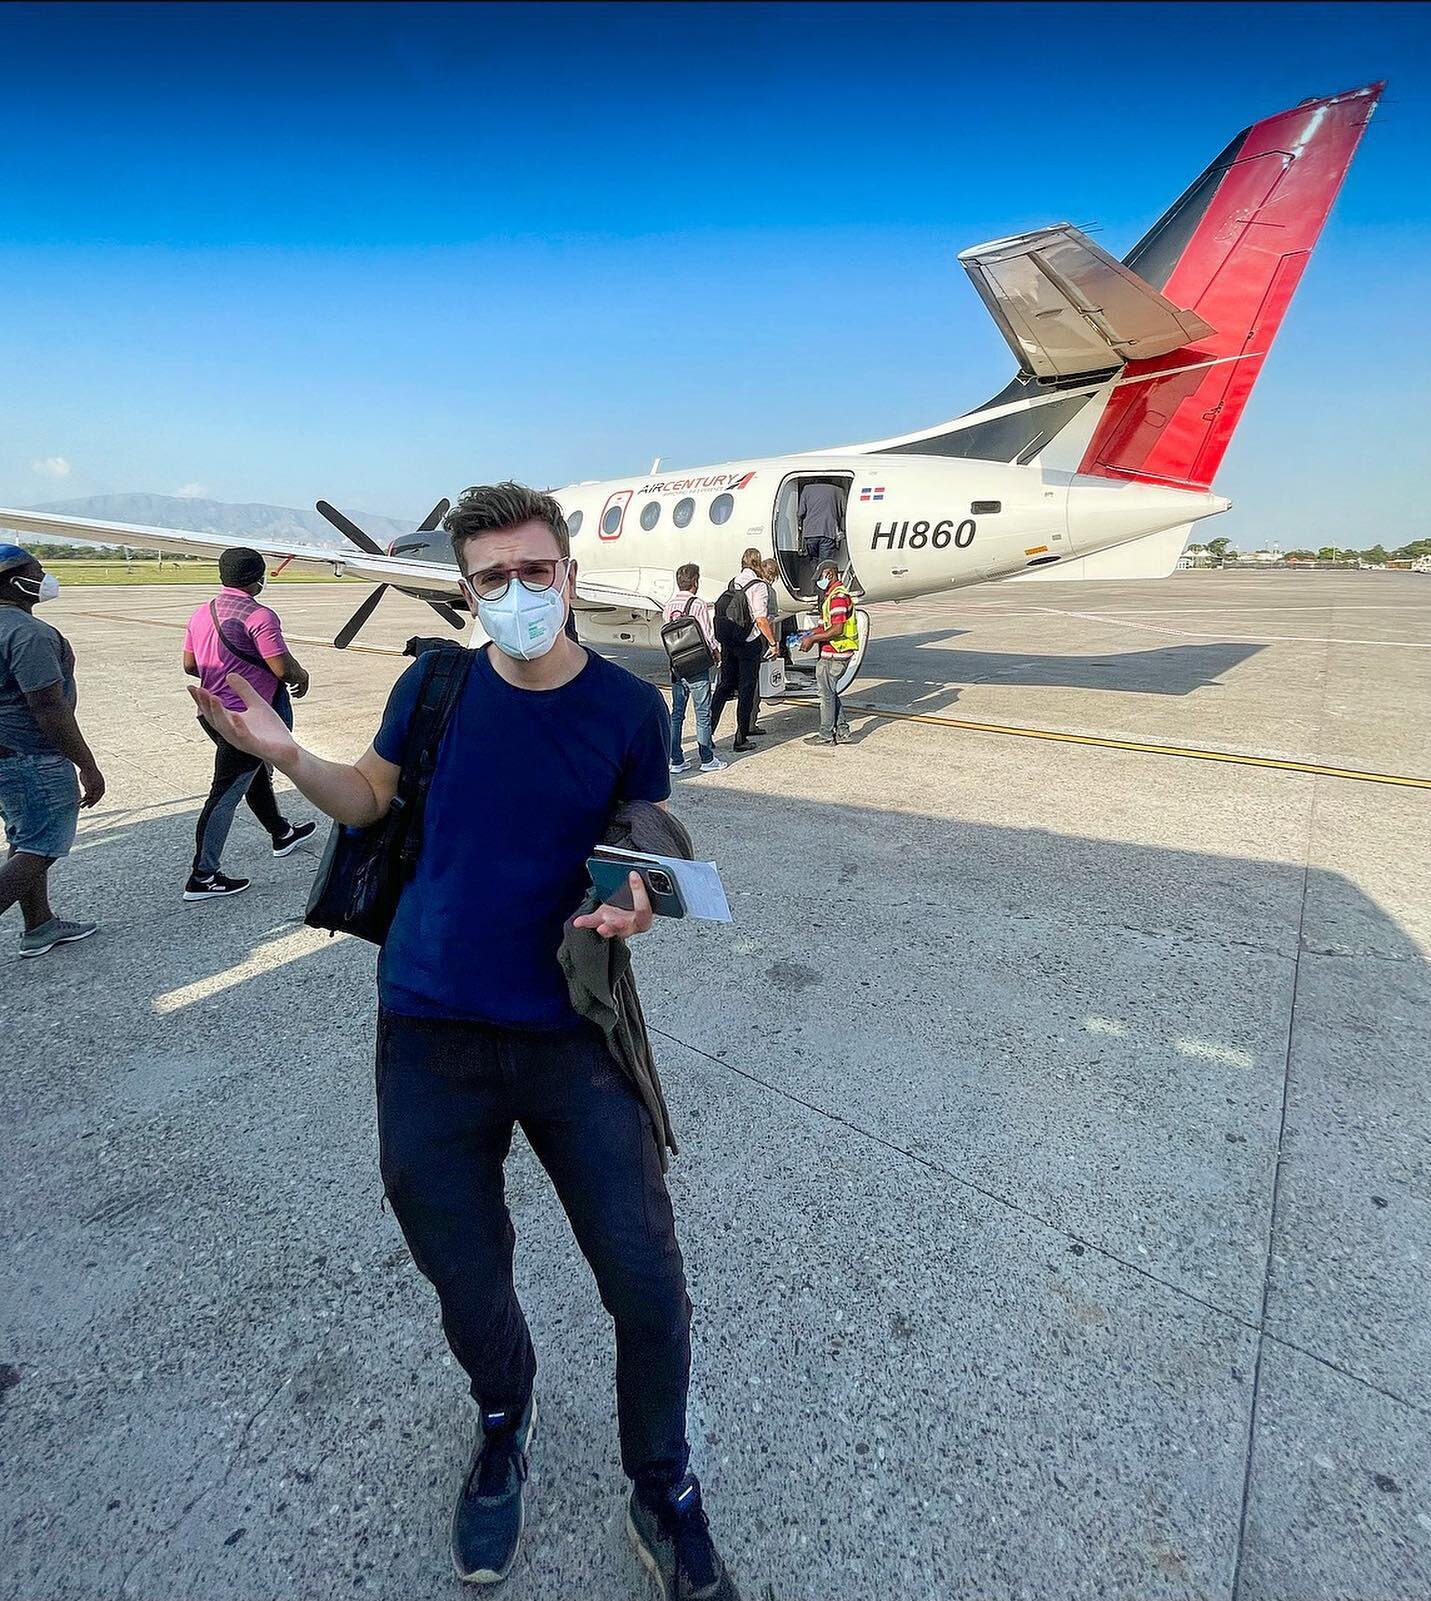 Sketchiest flight of my life?🤪 To get from Haiti to the Dominican Republic, I could choose between taking an eight hour, $40 bus ride or a $200 30-minute flight. Although our guides said we should take the bus, I felt flying would be safer... ⁣⁣
⁣⁣
